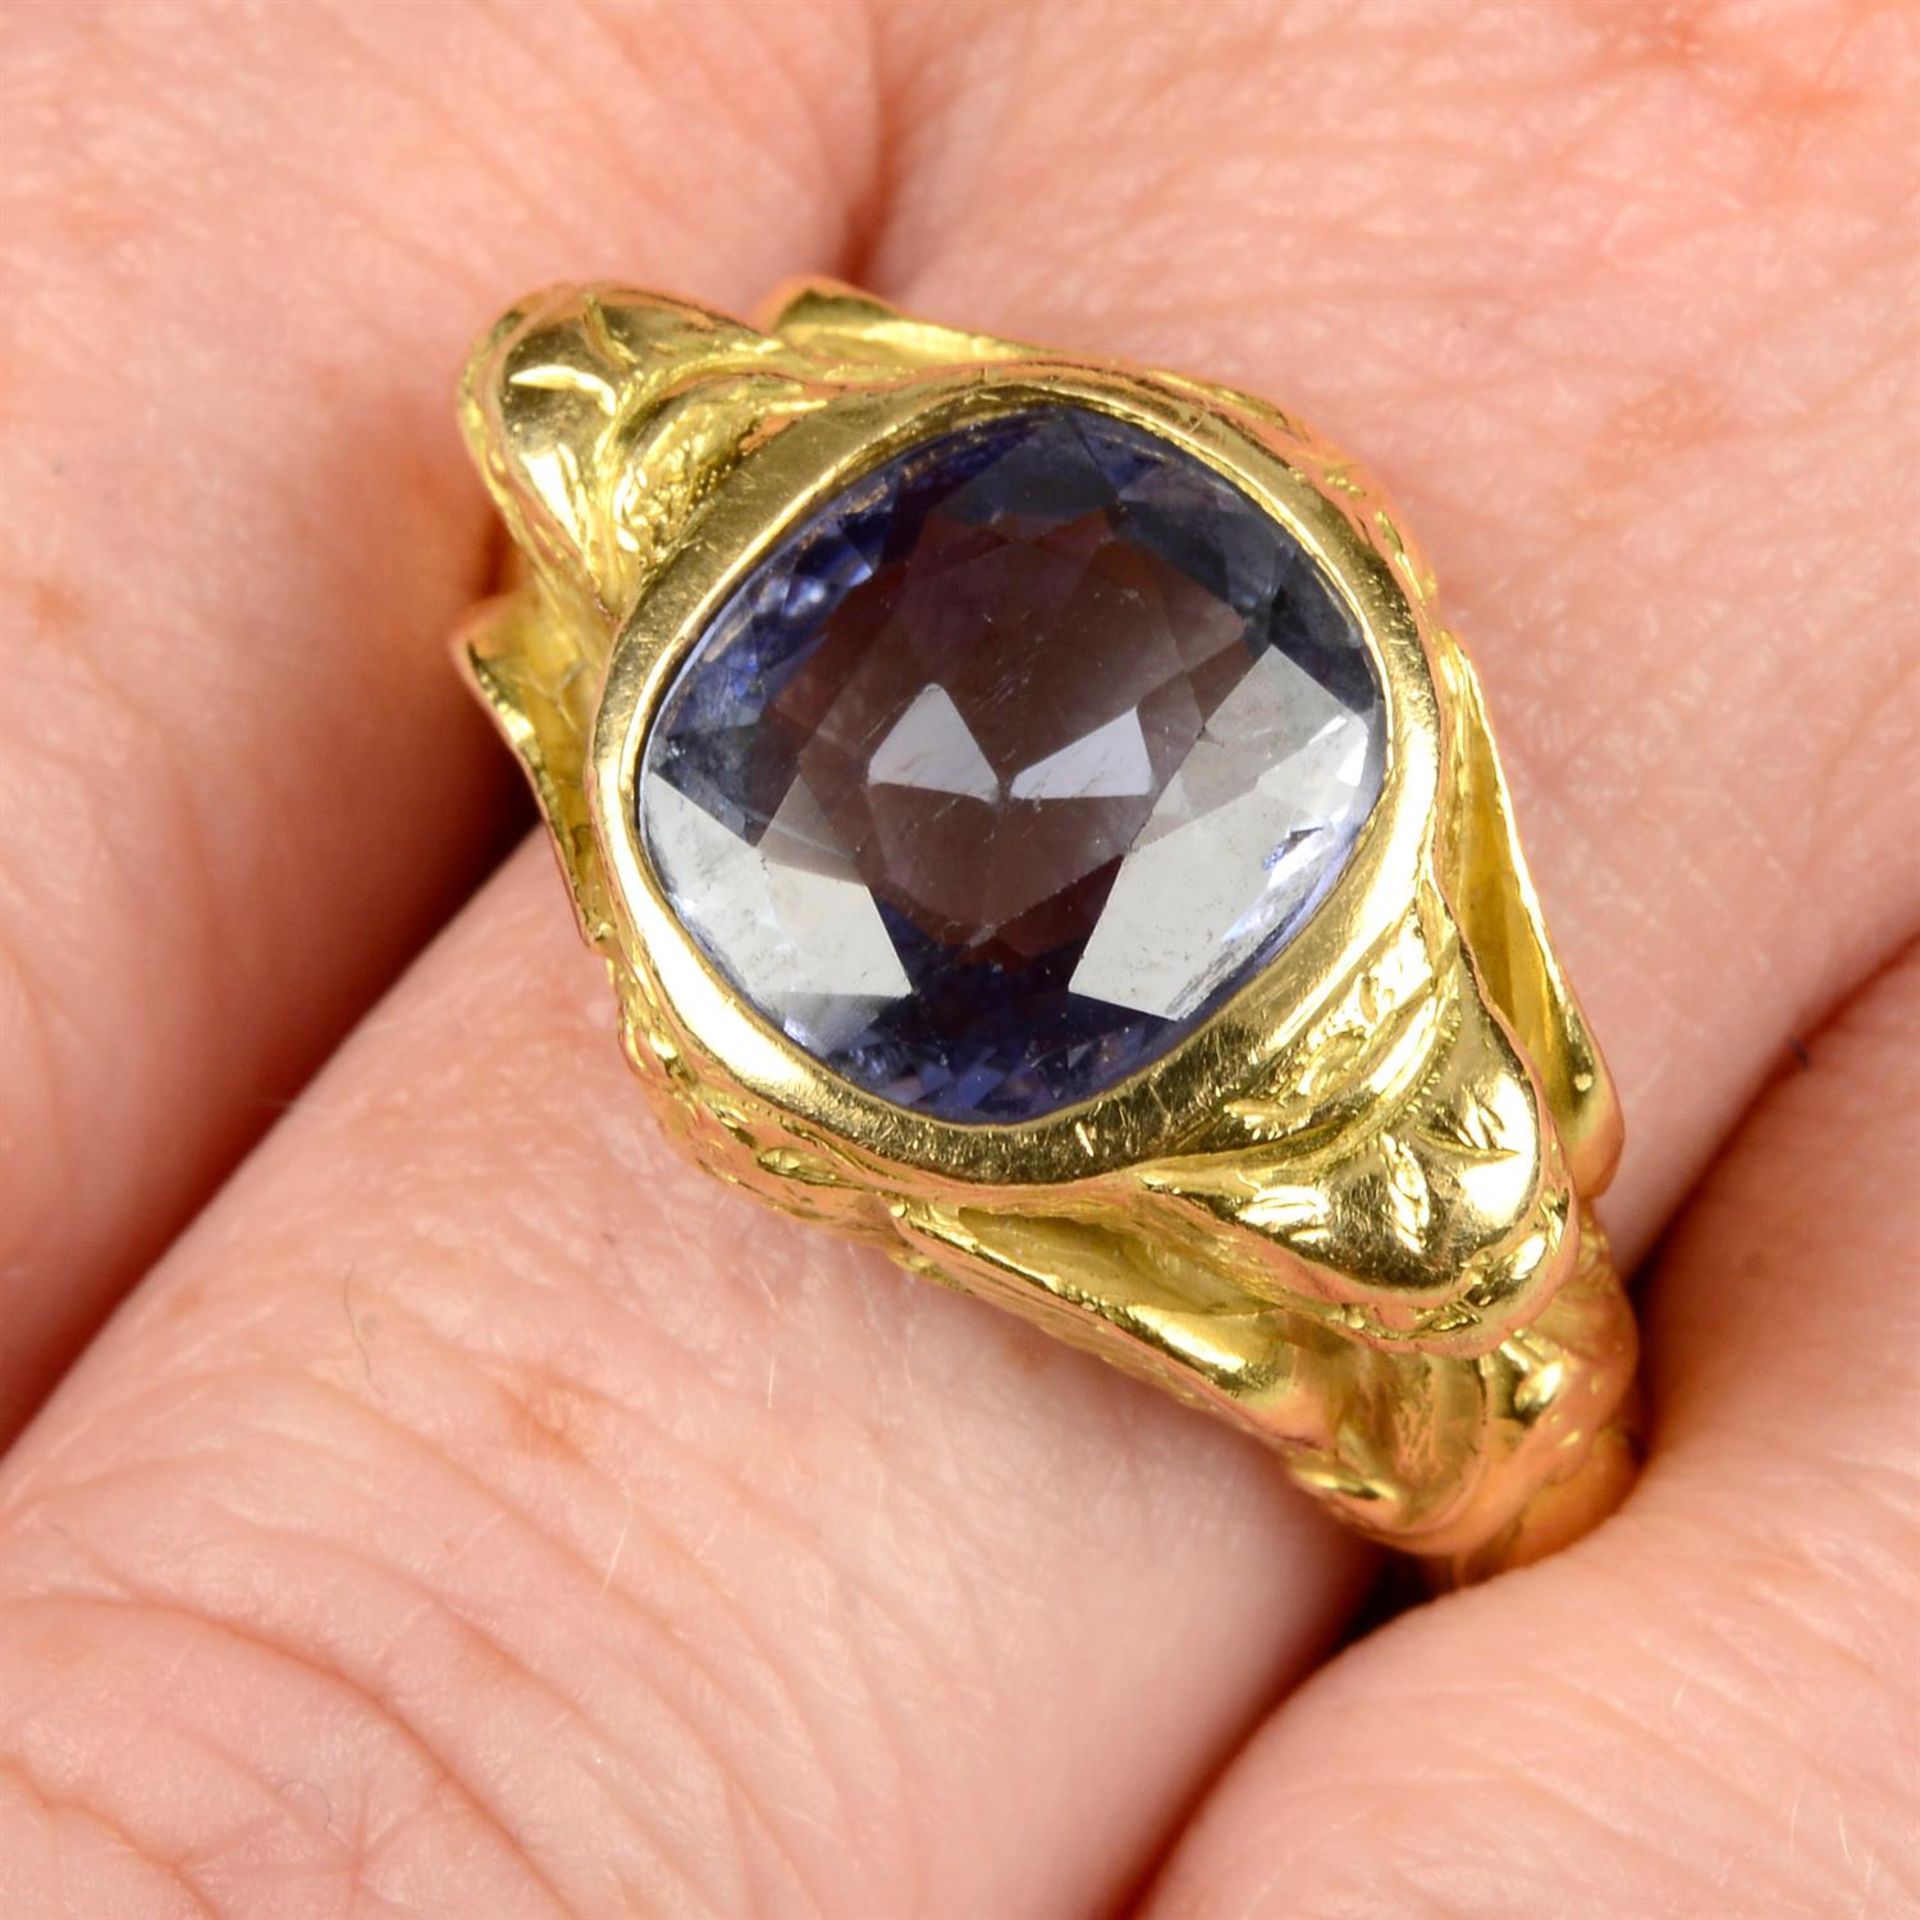 A Sri Lankan sapphire ring, with mythical winged creature shoulders and lion mask gallery.